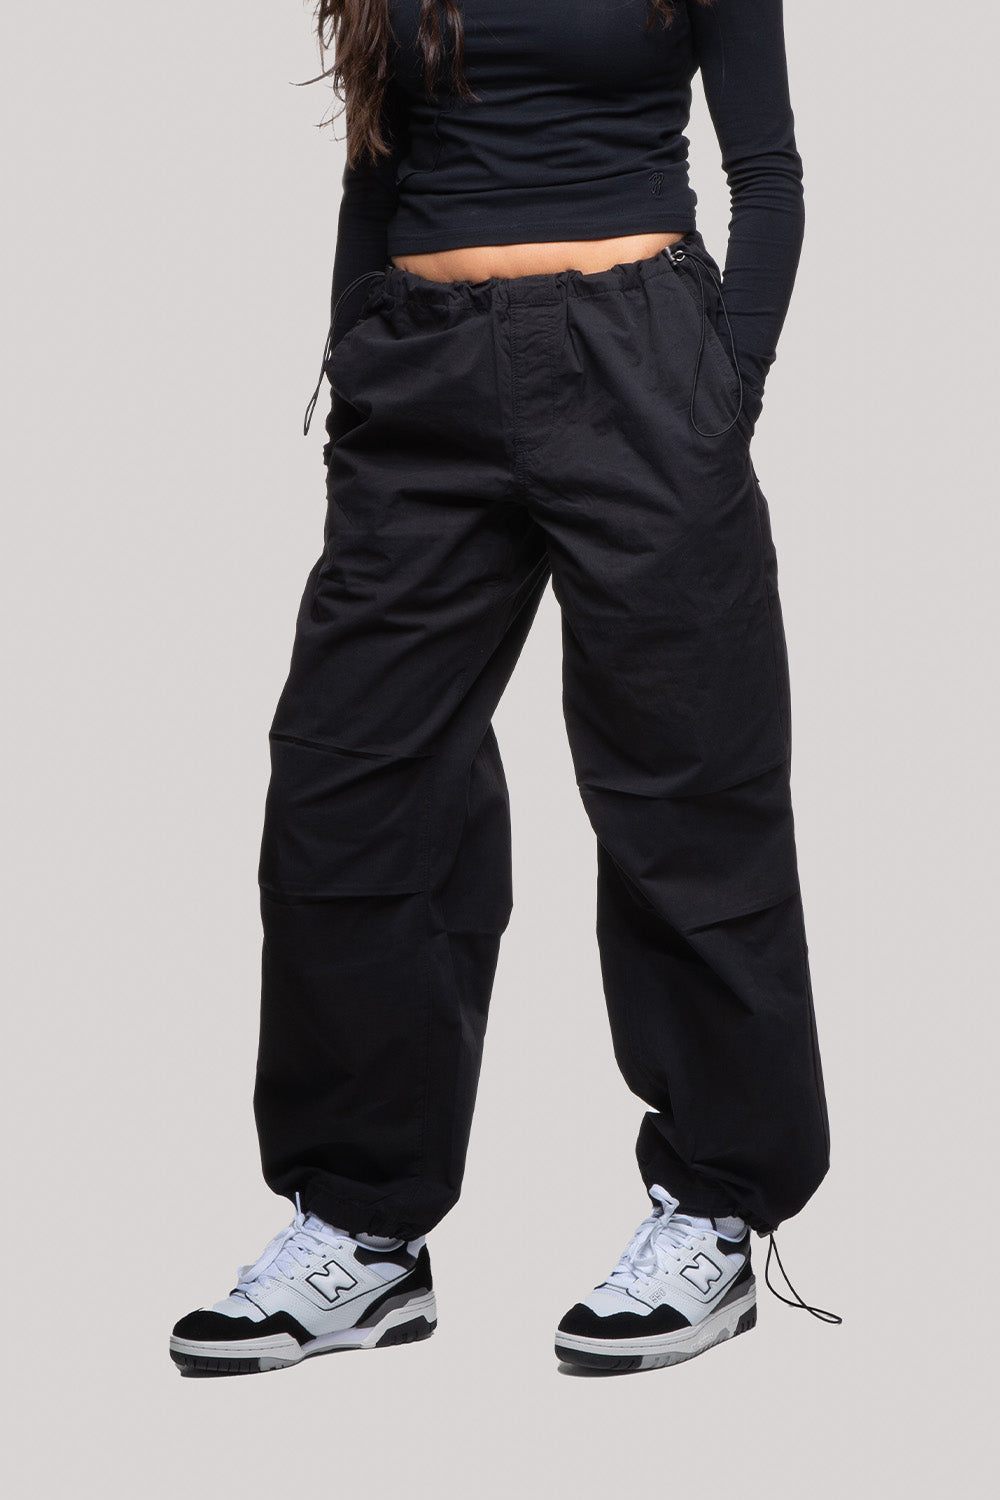 Parachute pants for women - Quality products with free shipping